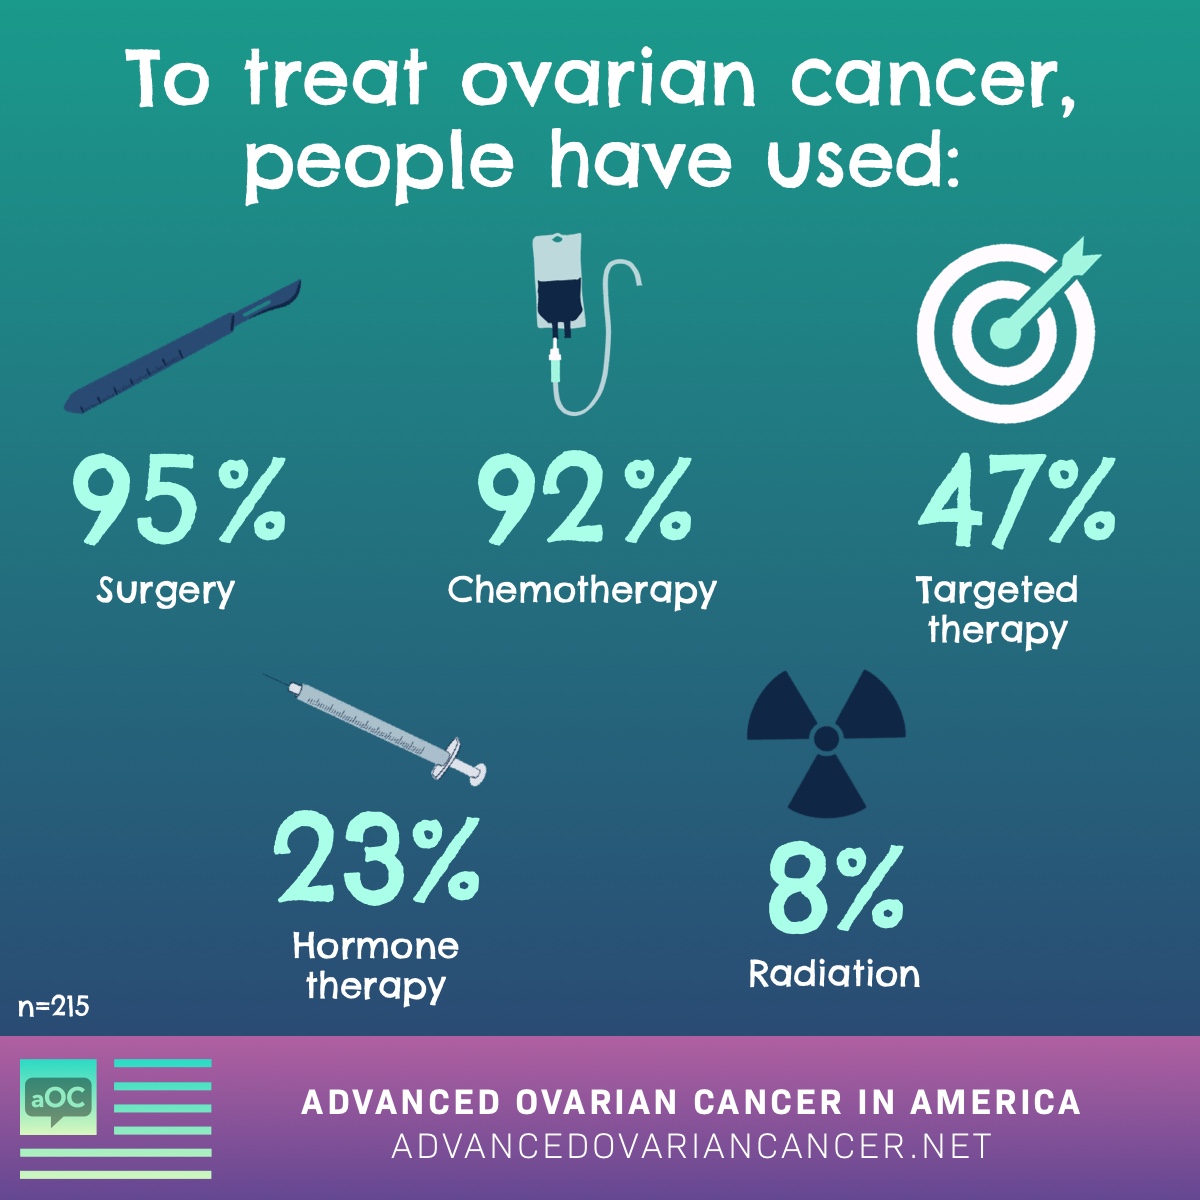 To treat ovarian cancer, people have used Surgery 95%, Chemotherapy 92%, Targeted therapy 47%, Hormone therapy 23%, Radiation 8%